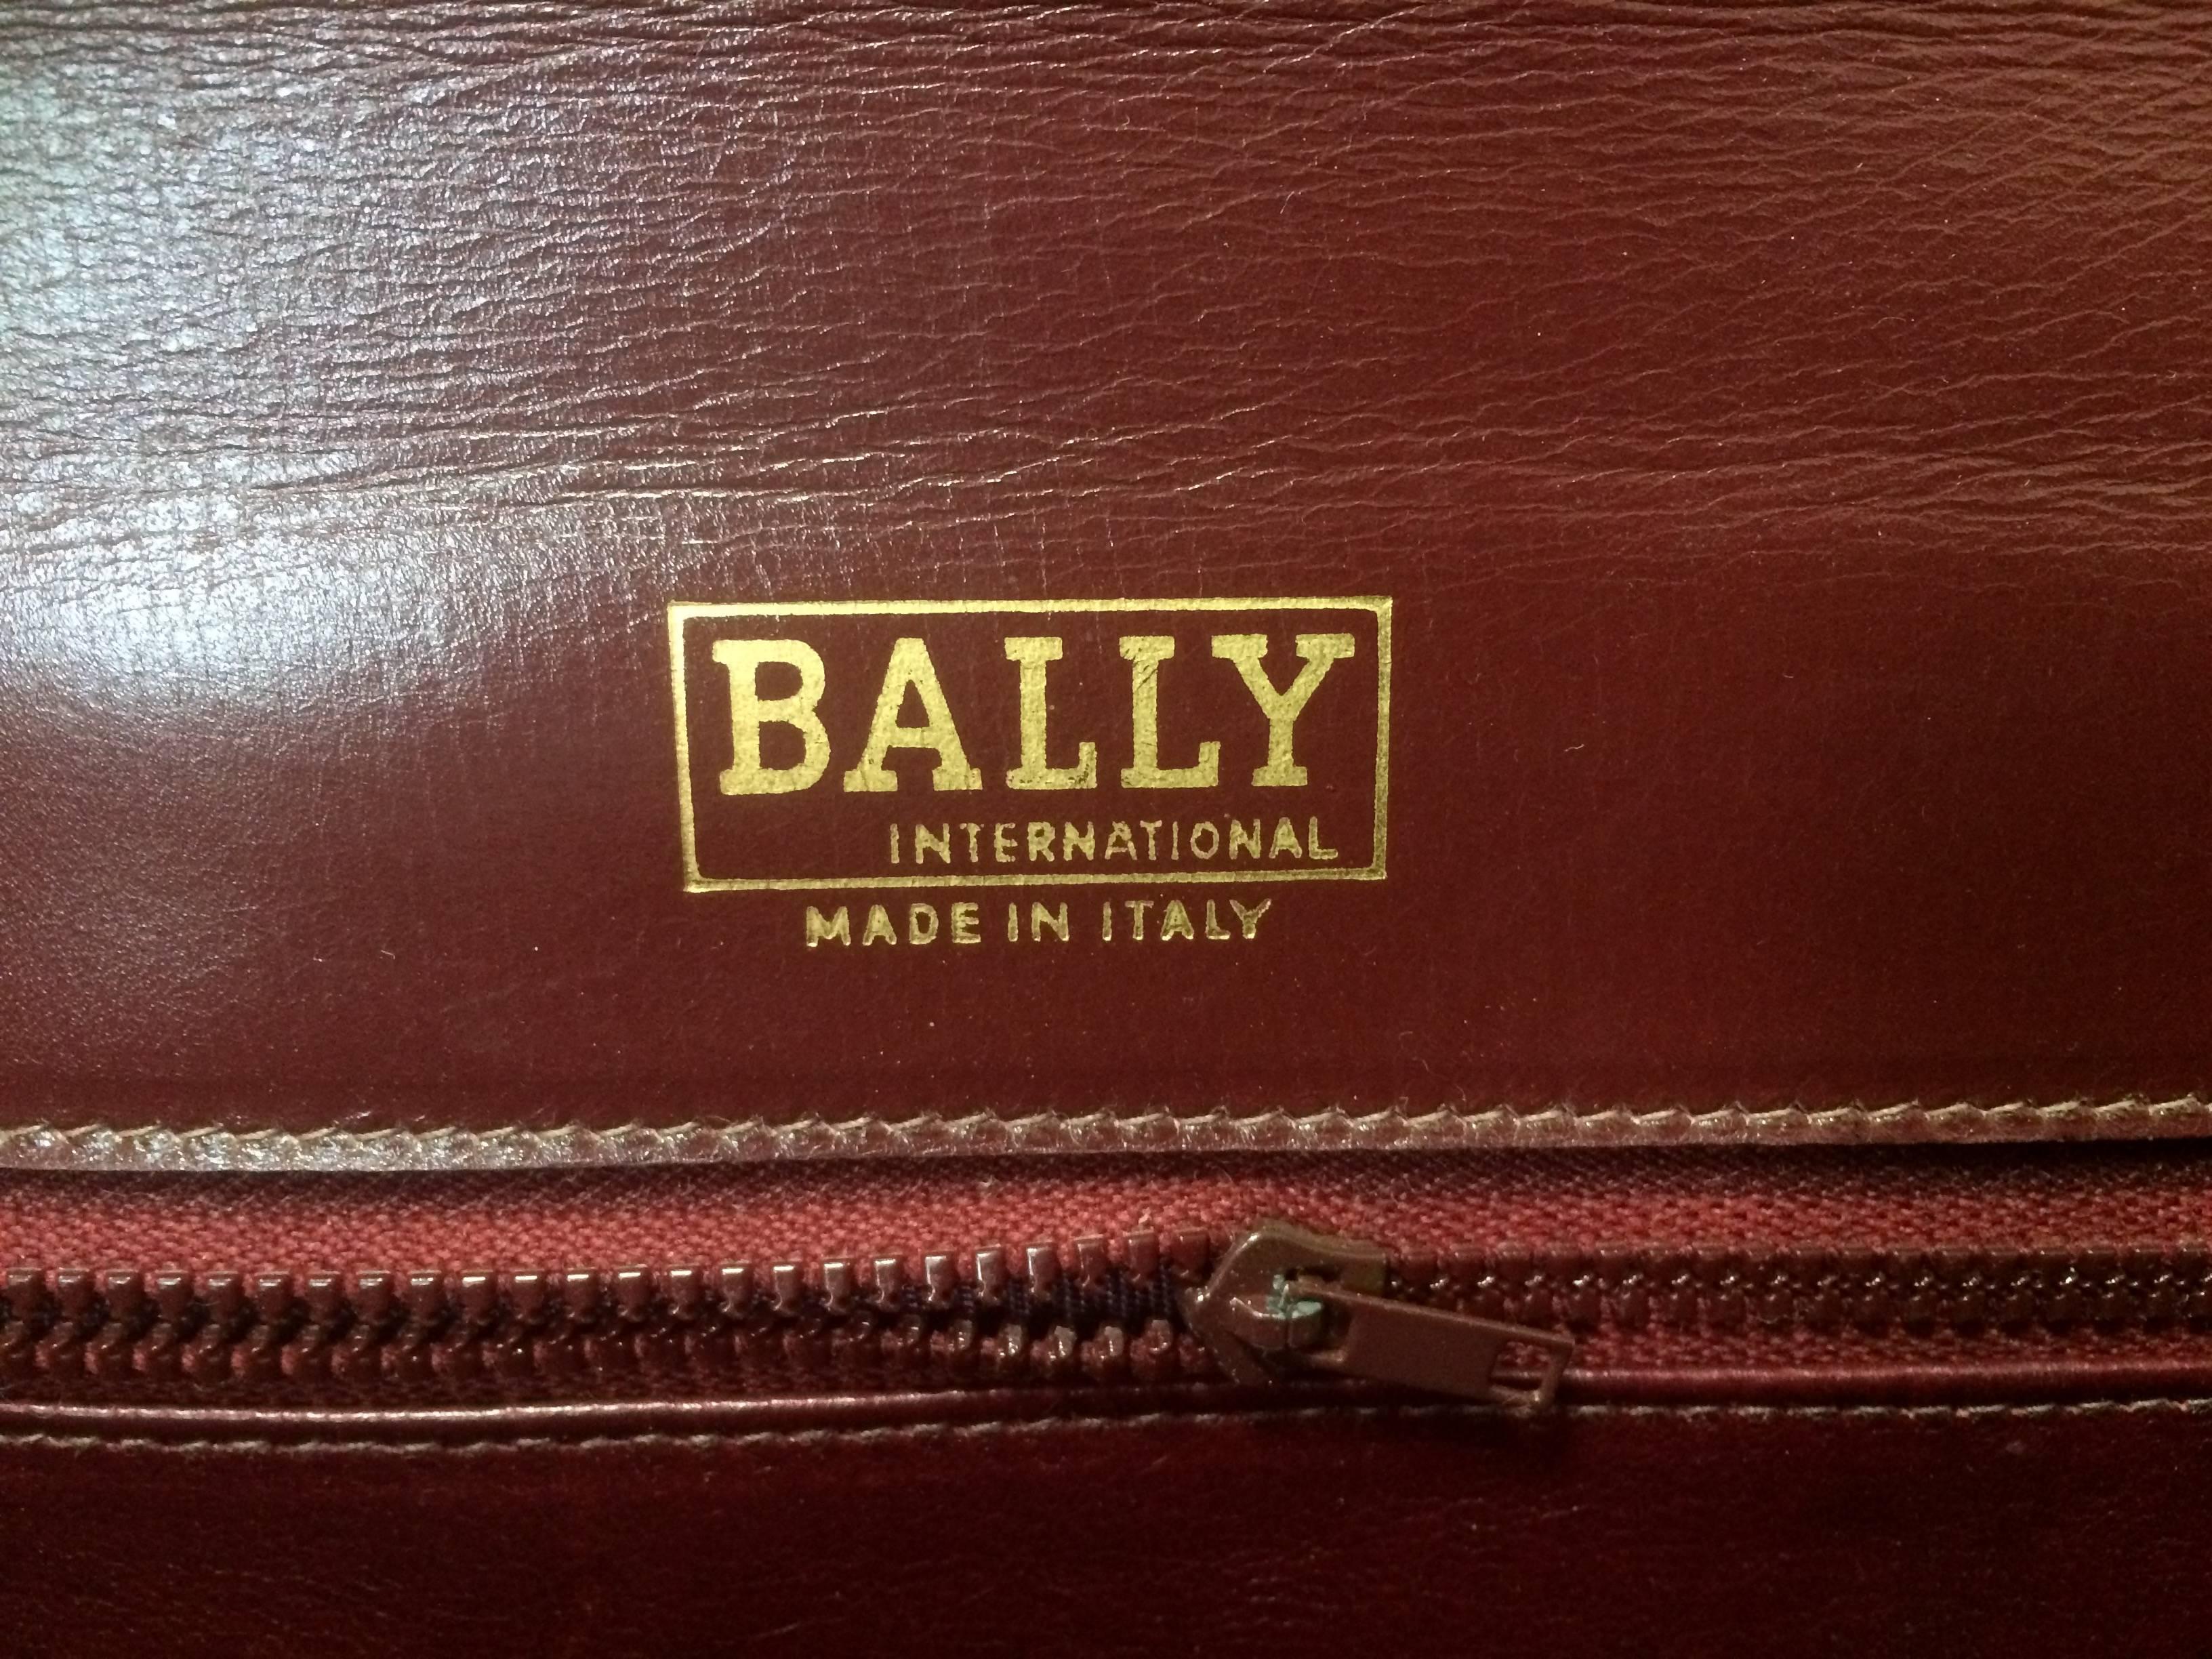 Vintage BALLY genuine wine suede leather clutch bag, mini purse with golden logo For Sale 2